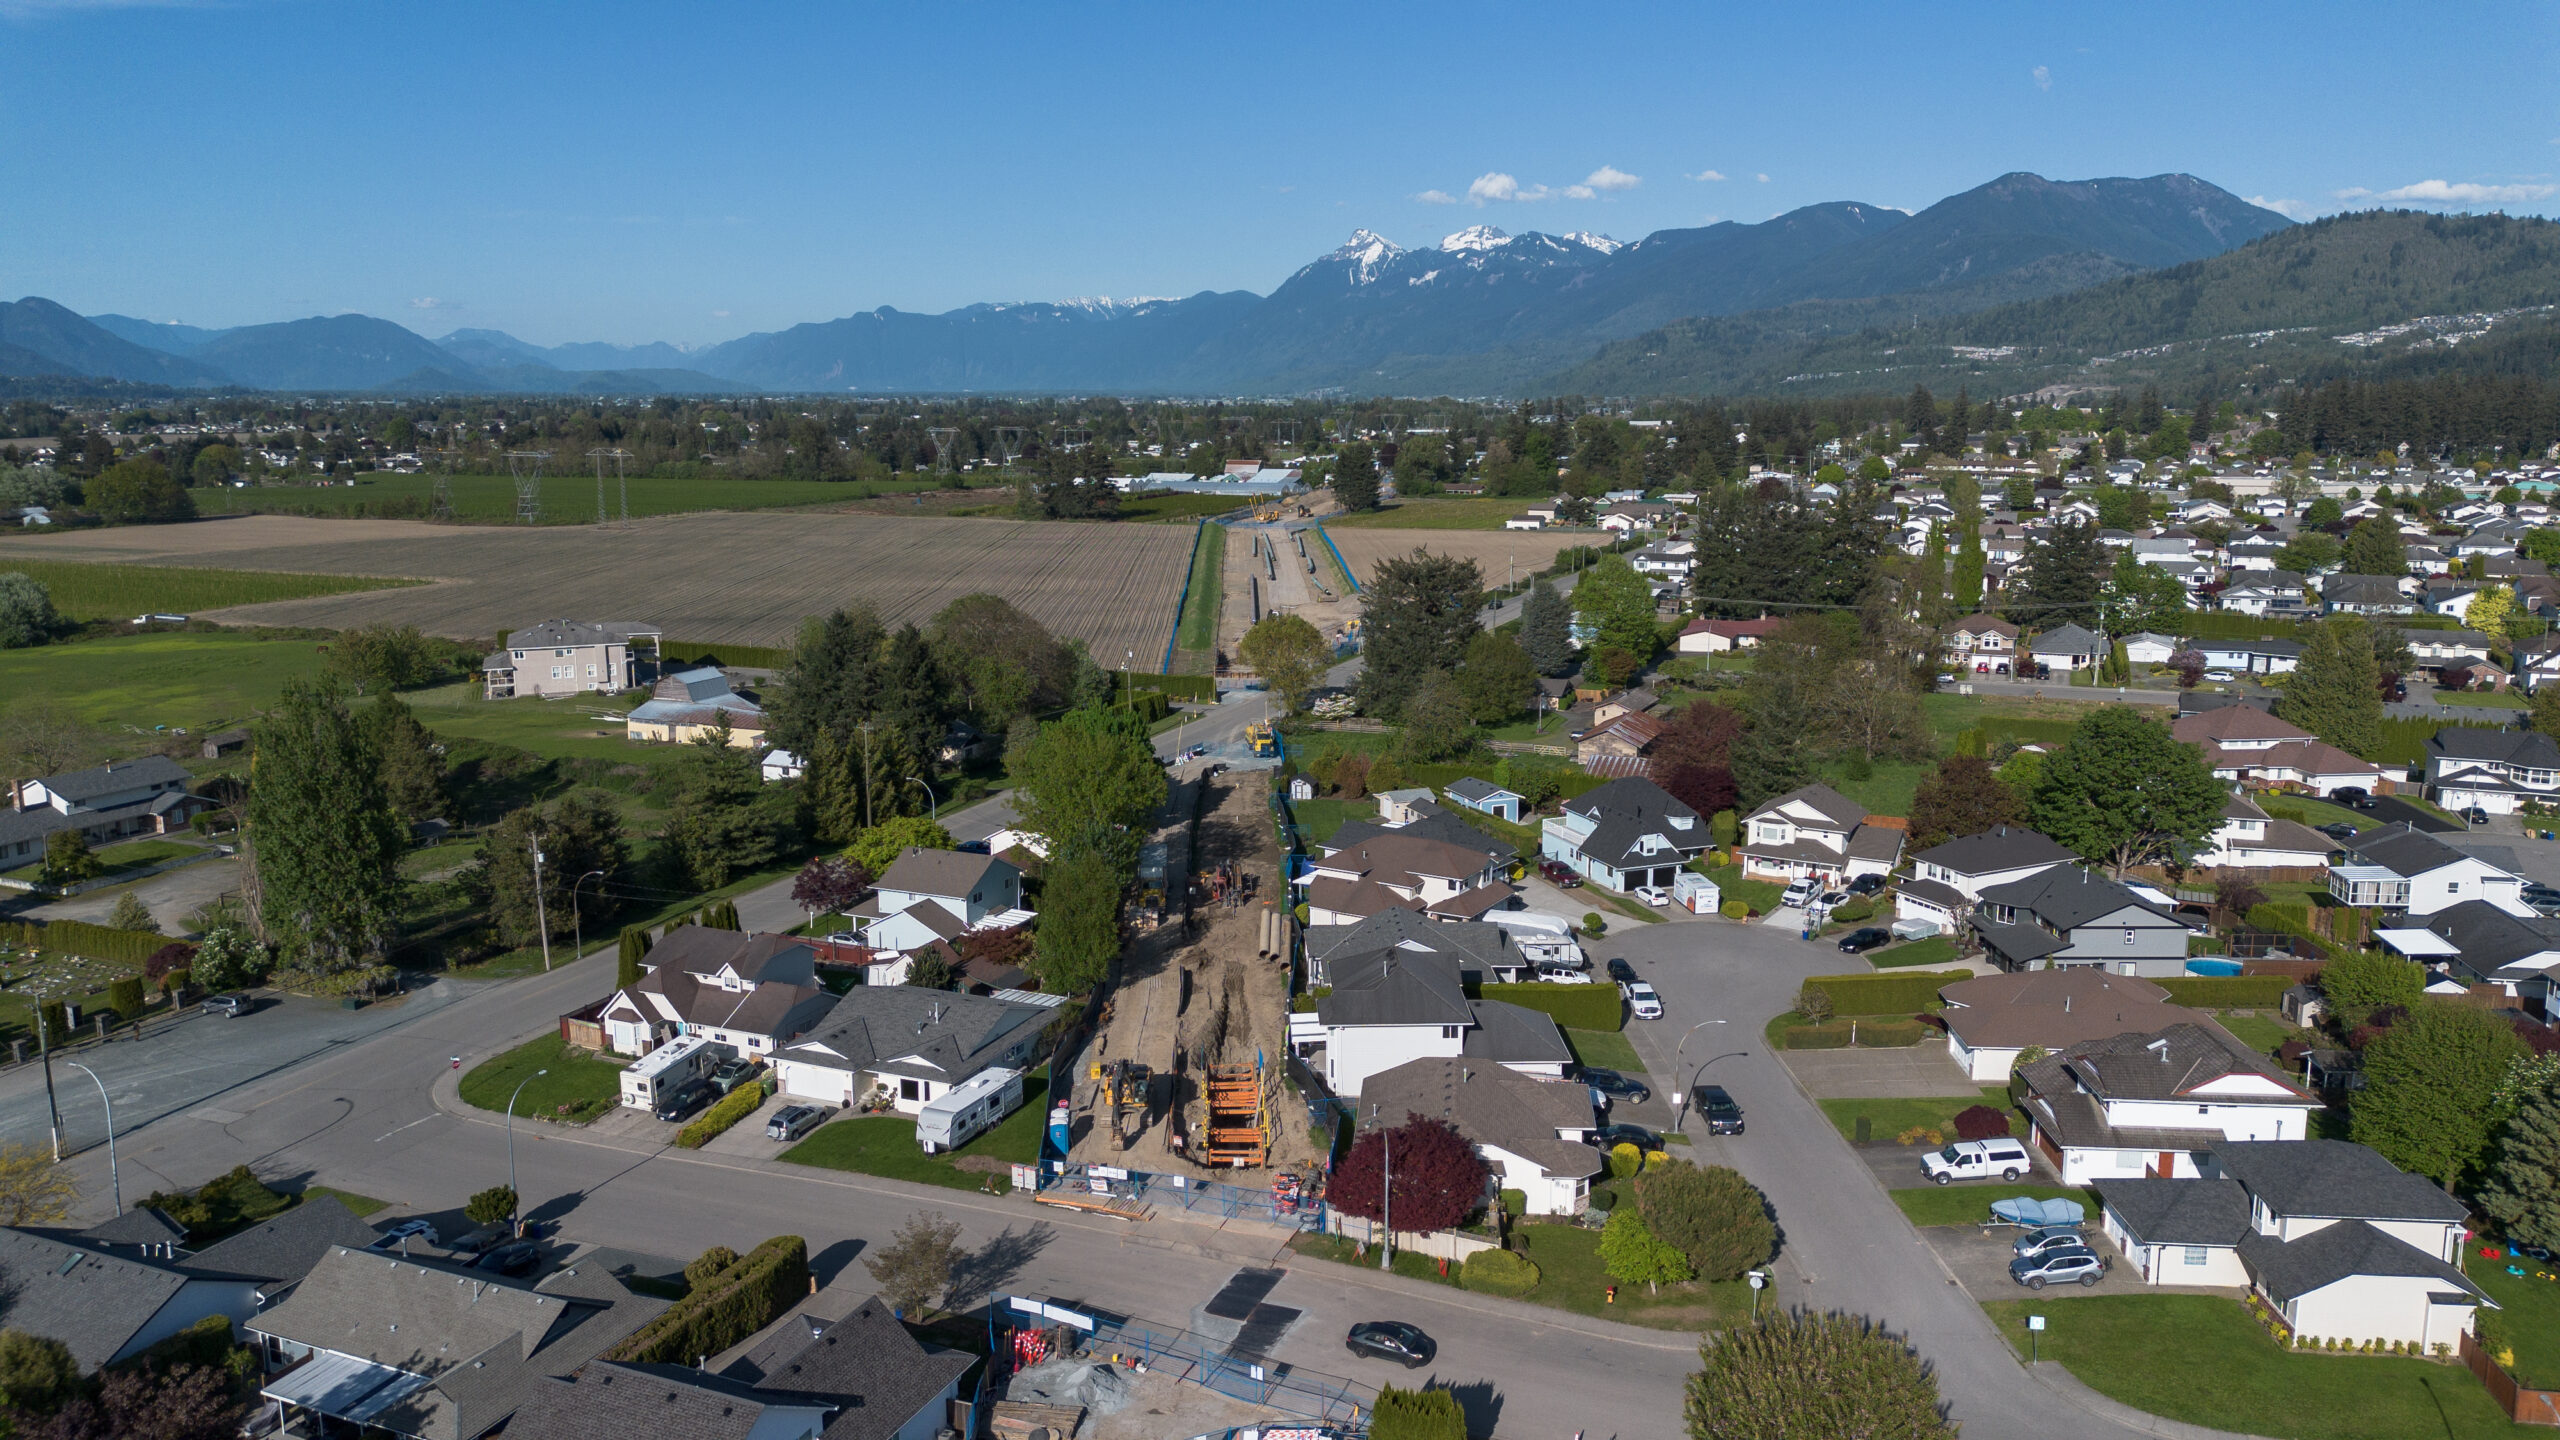 Aerial view of a suburb and construction of a pipeline cutting through a neighbourhood with mountains in the background.